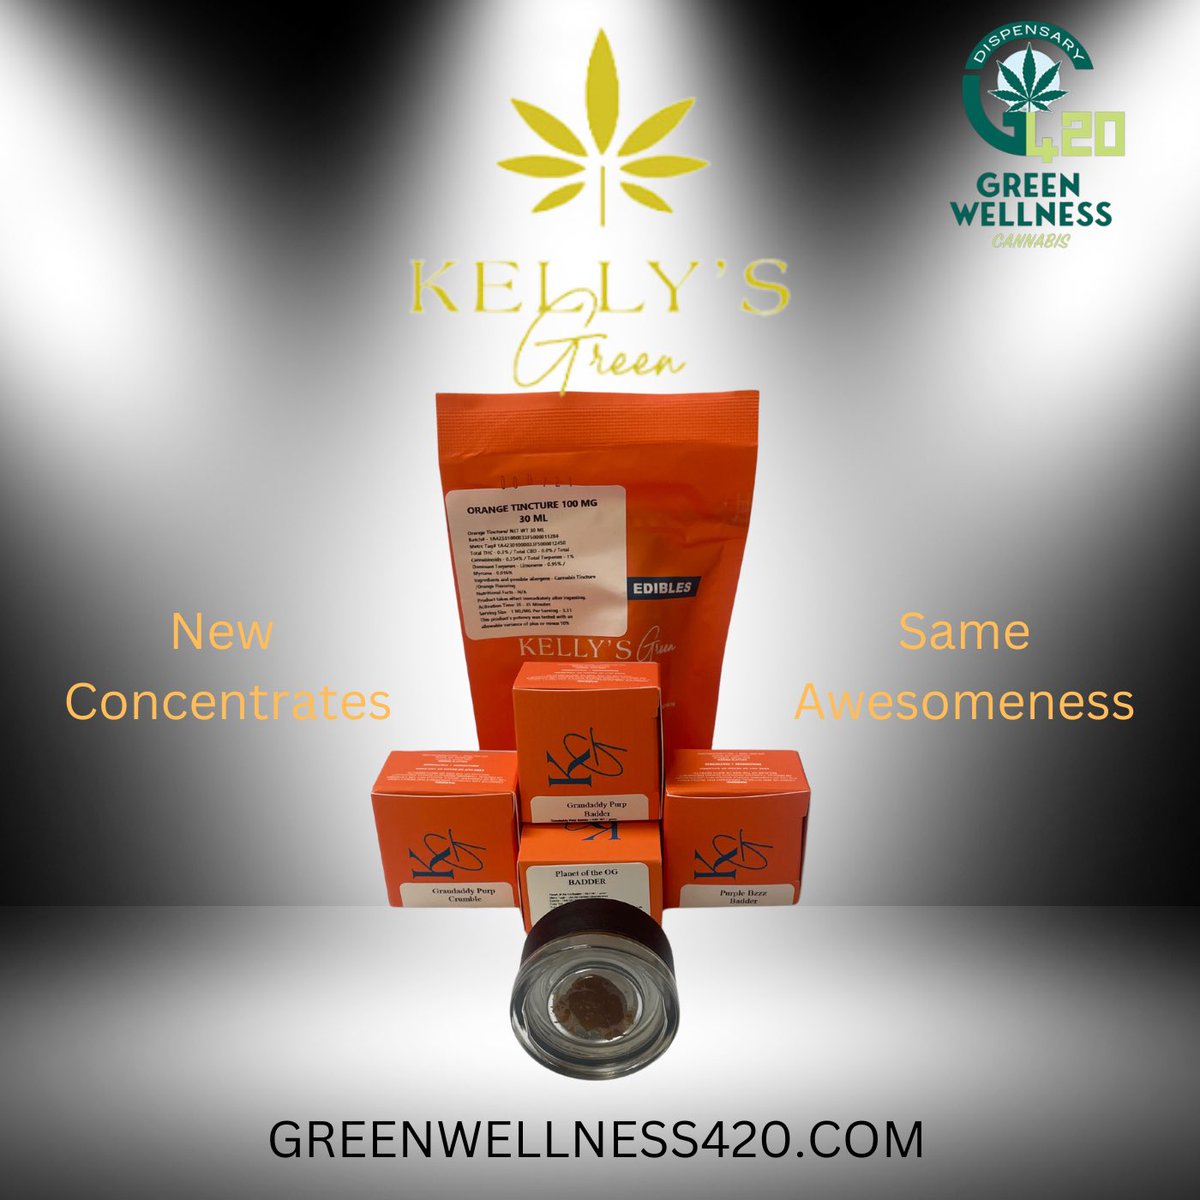 It’s Amazing 🤩! Looking for alternatives to smoking flower 🪴?
Concentrates are a great substitute and pack a mean punch! 🥊 

Social Disclaimer:
For educational purposes only.

#kellysgreen #mississippi #cannabisconcentrates #medicalcannabis #herbalmedicine